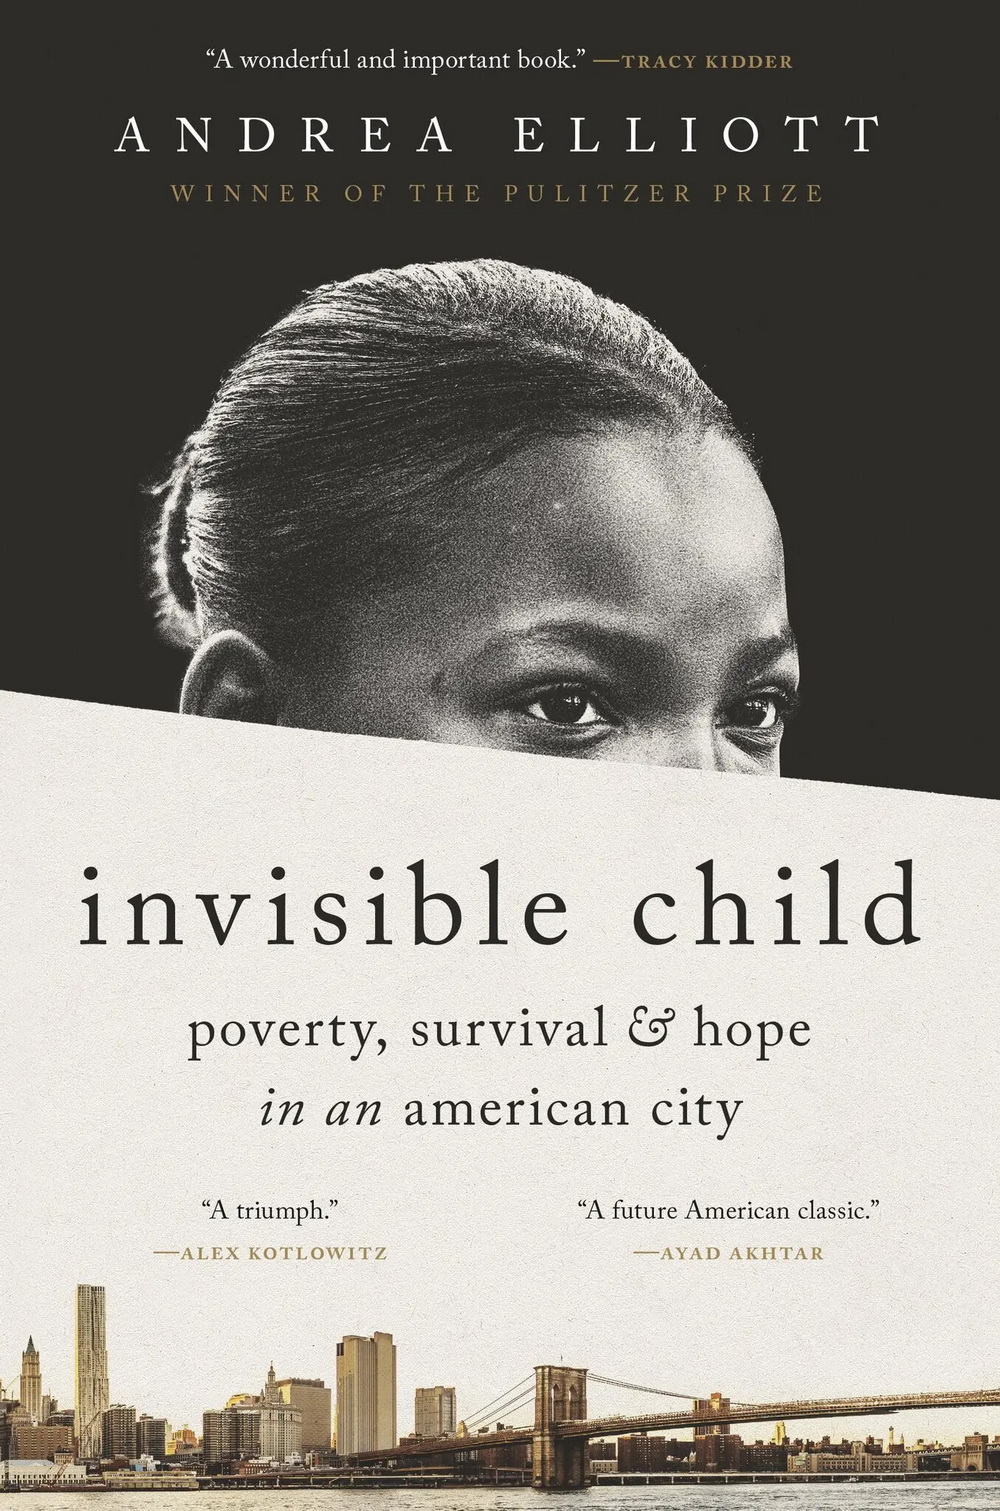 Invisible Children: Poverty, Survival, and Hope in American Cities